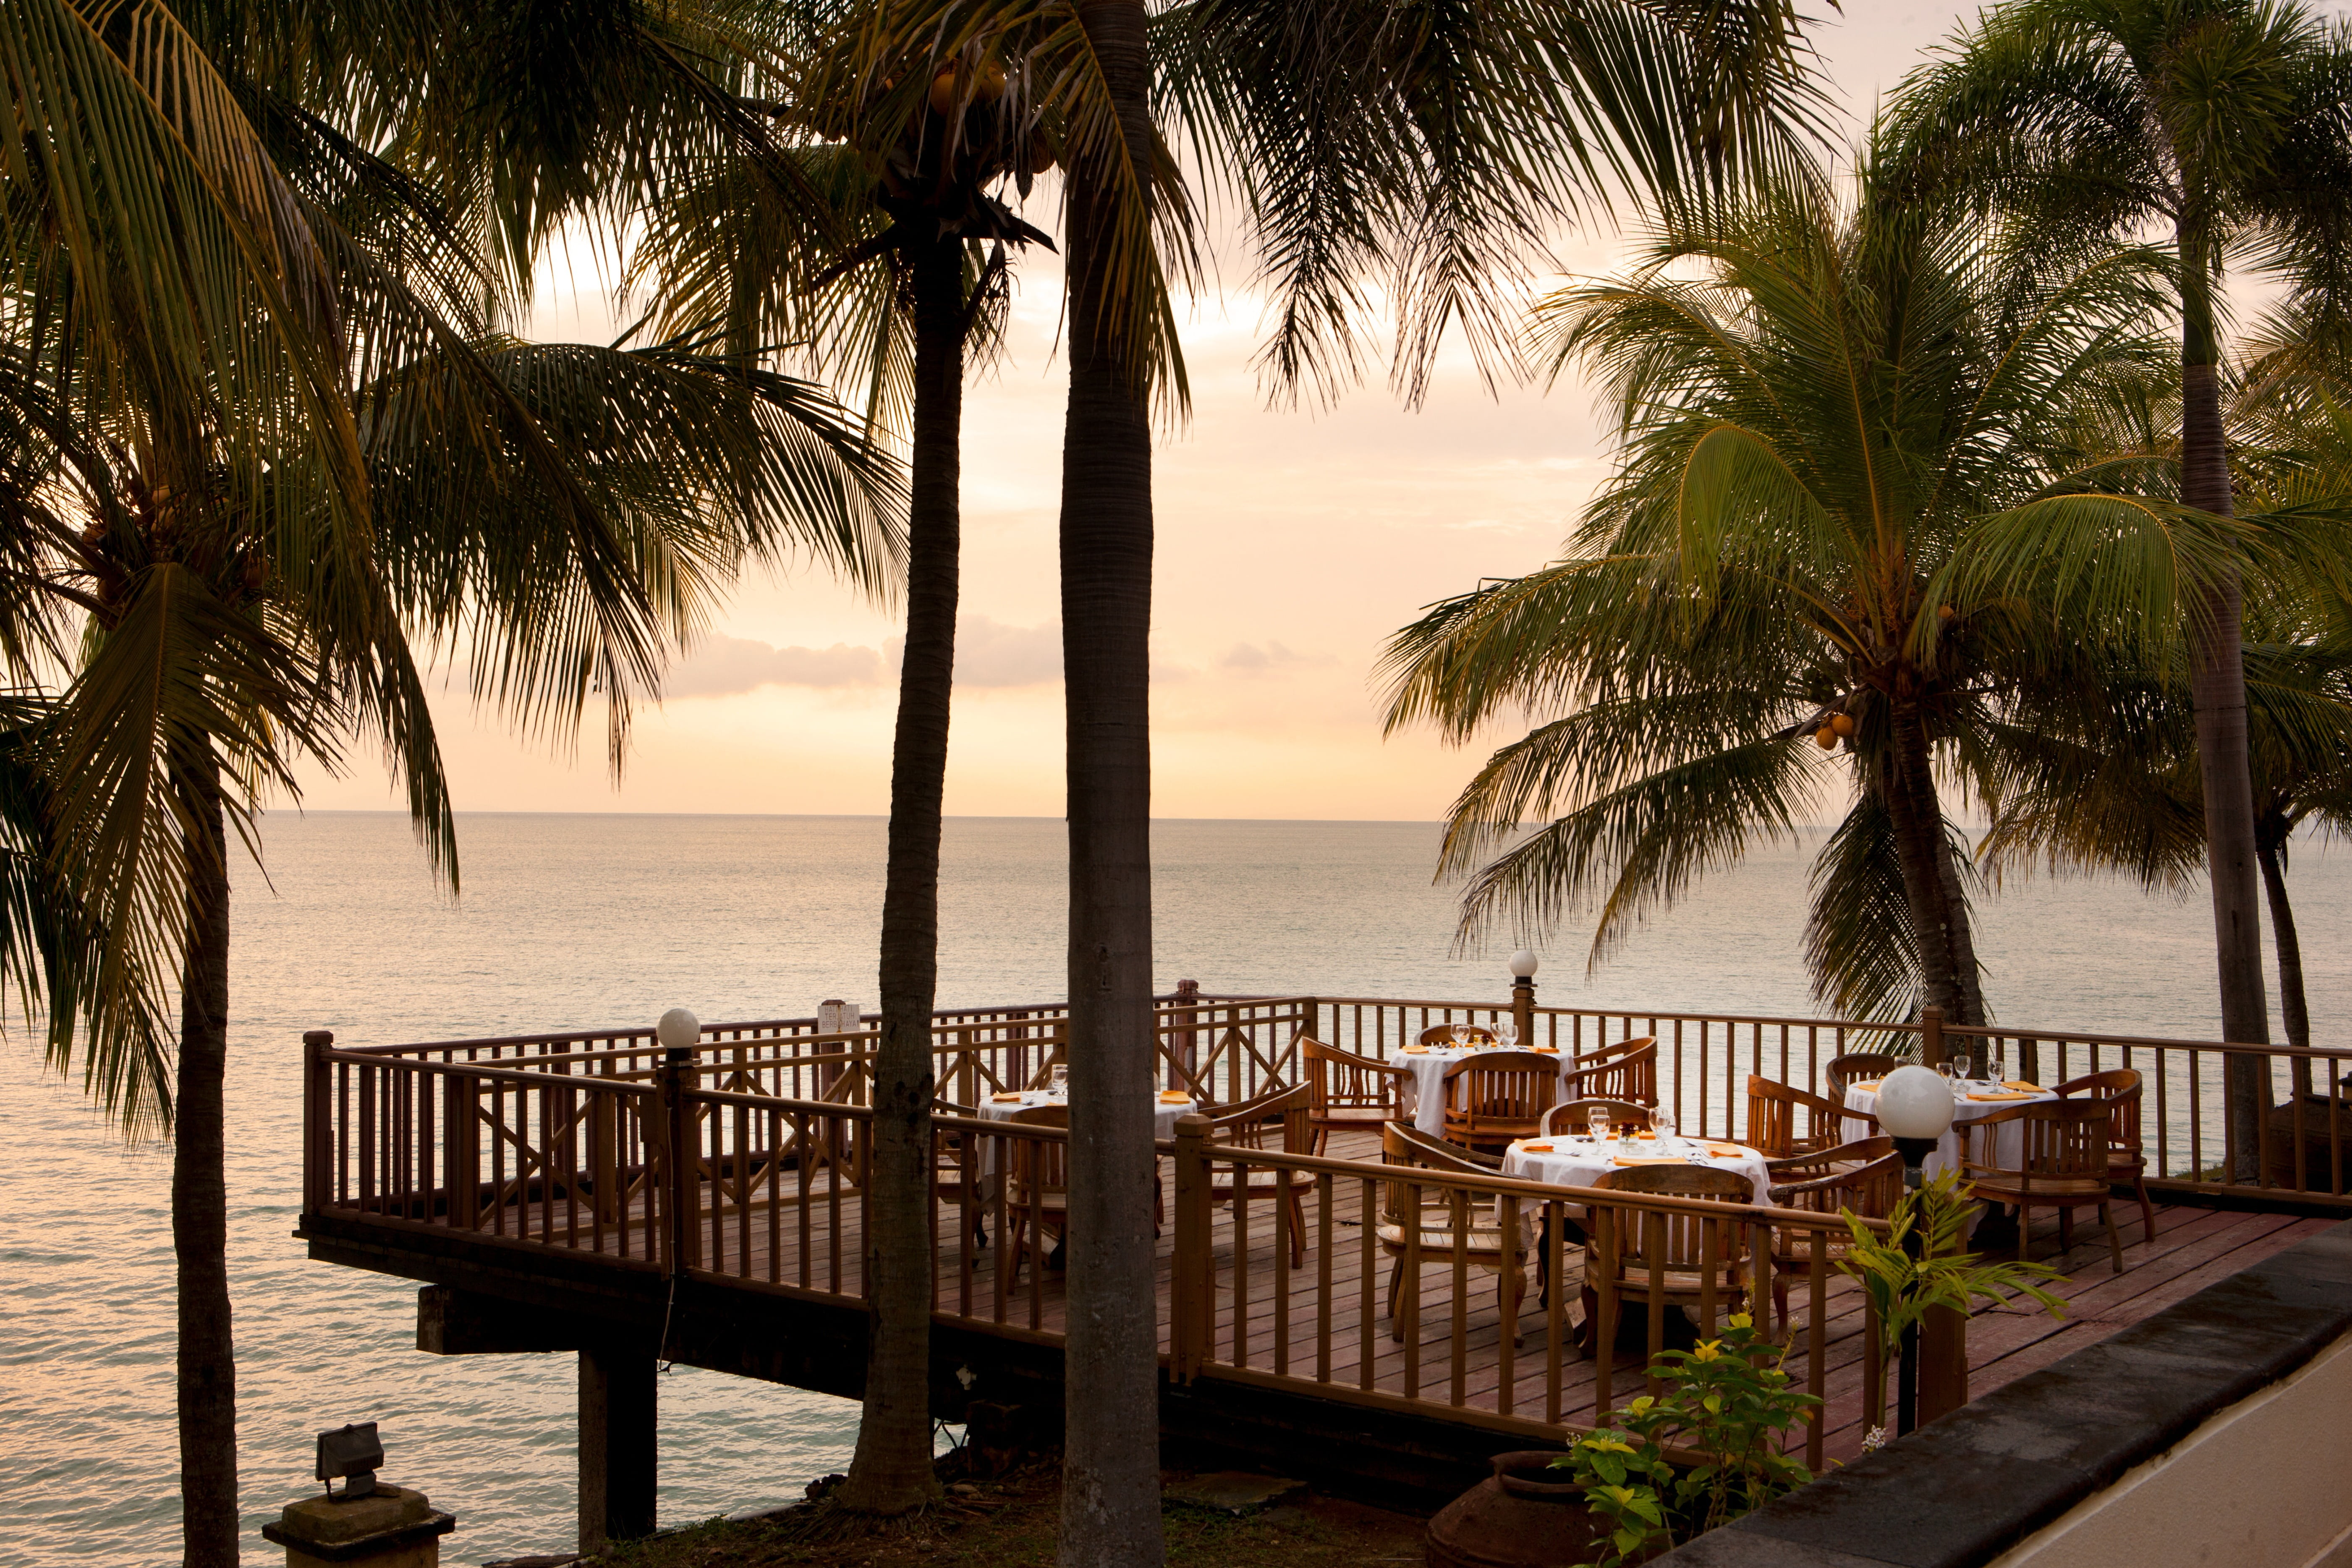 brown wooden deck near palm trees and body of water, beach, beach resort